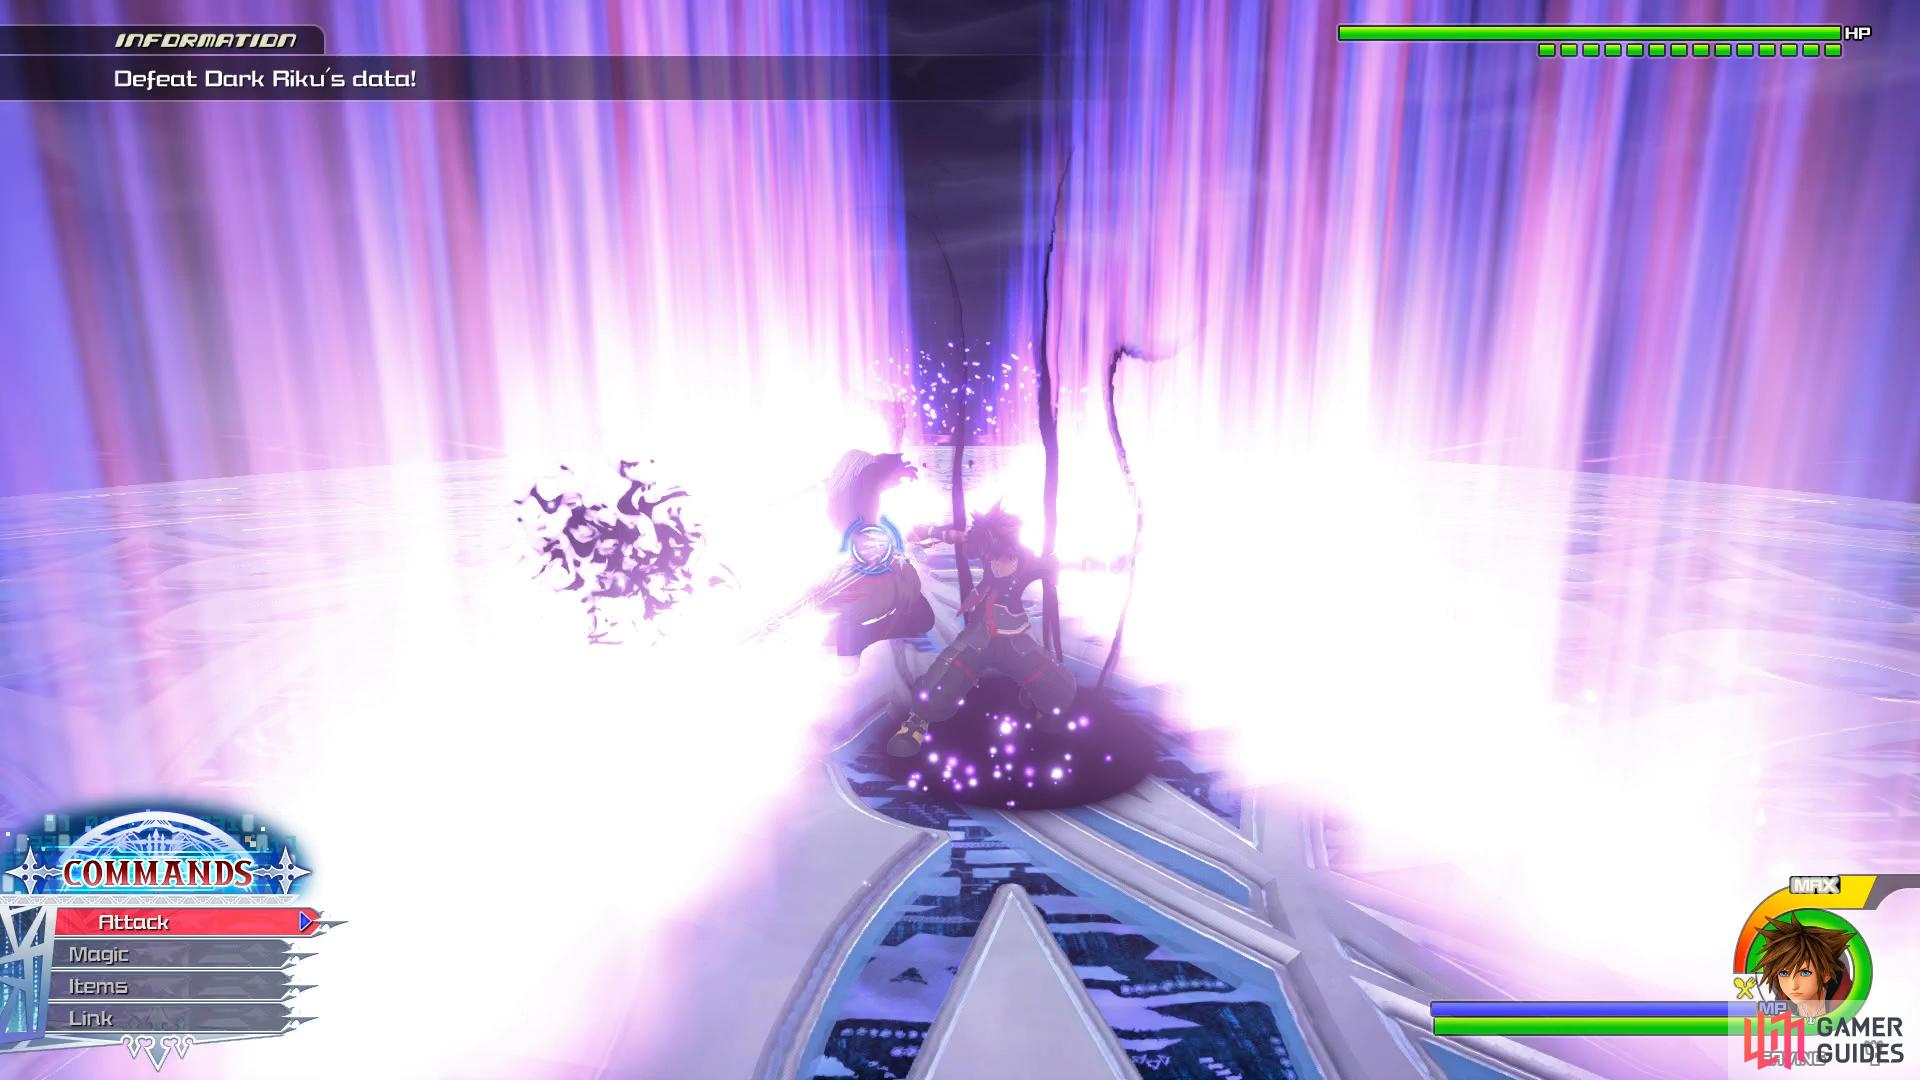 Dark Riku will generate Shockwaves throughout which can be deflected